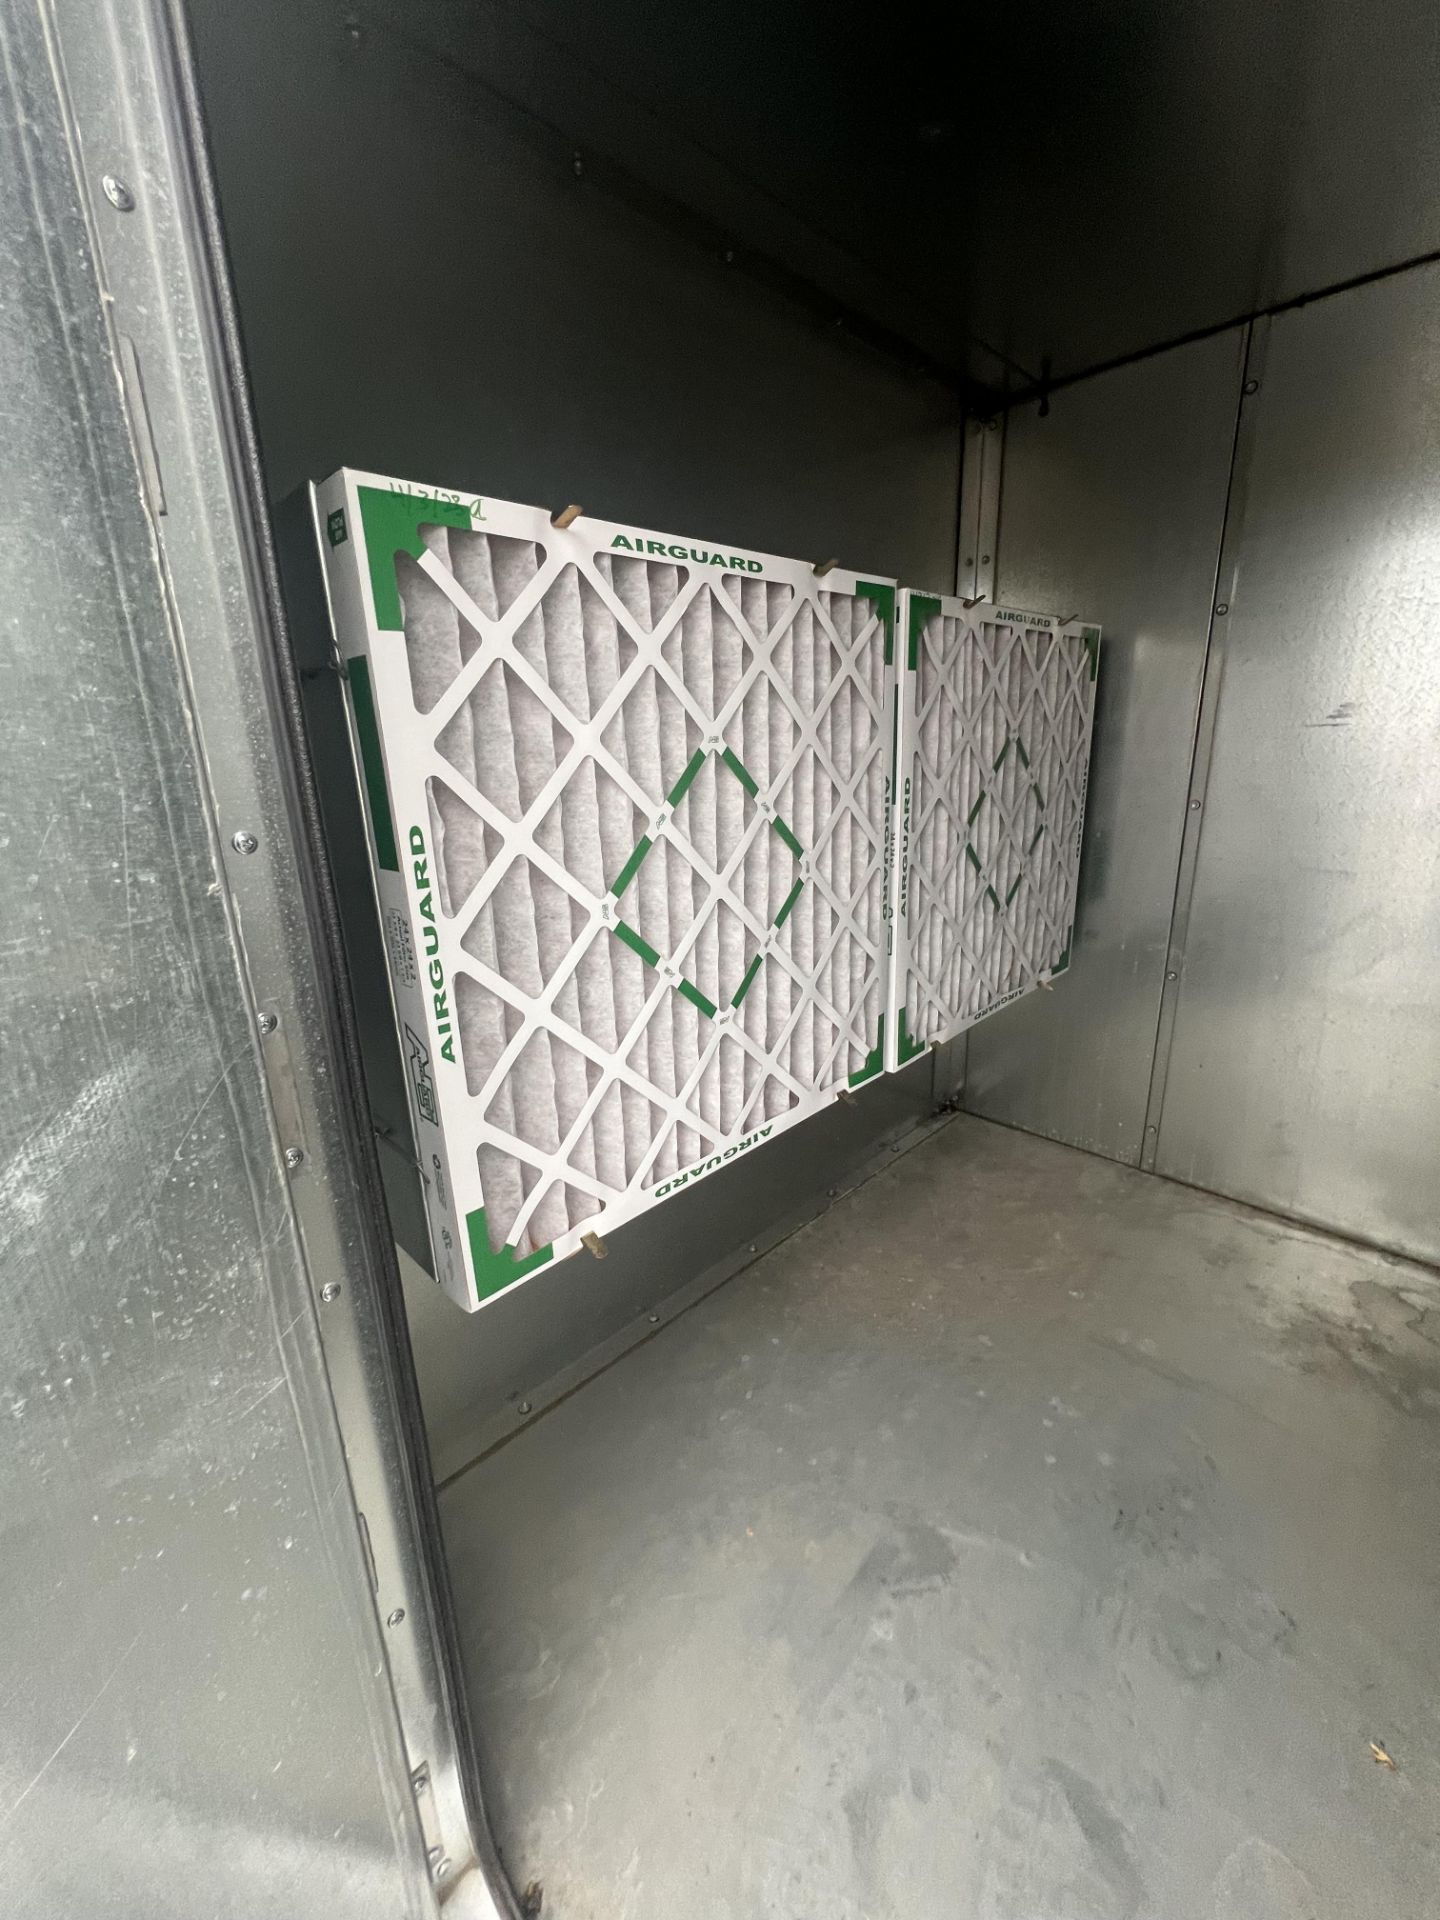 CLIMATE BY DESIGN AIR HANDLING UNIT, MODEL AHU-2E, S/N024632-001-001, 460 V, PREVIOUSLY OPERATING IN - Image 16 of 20